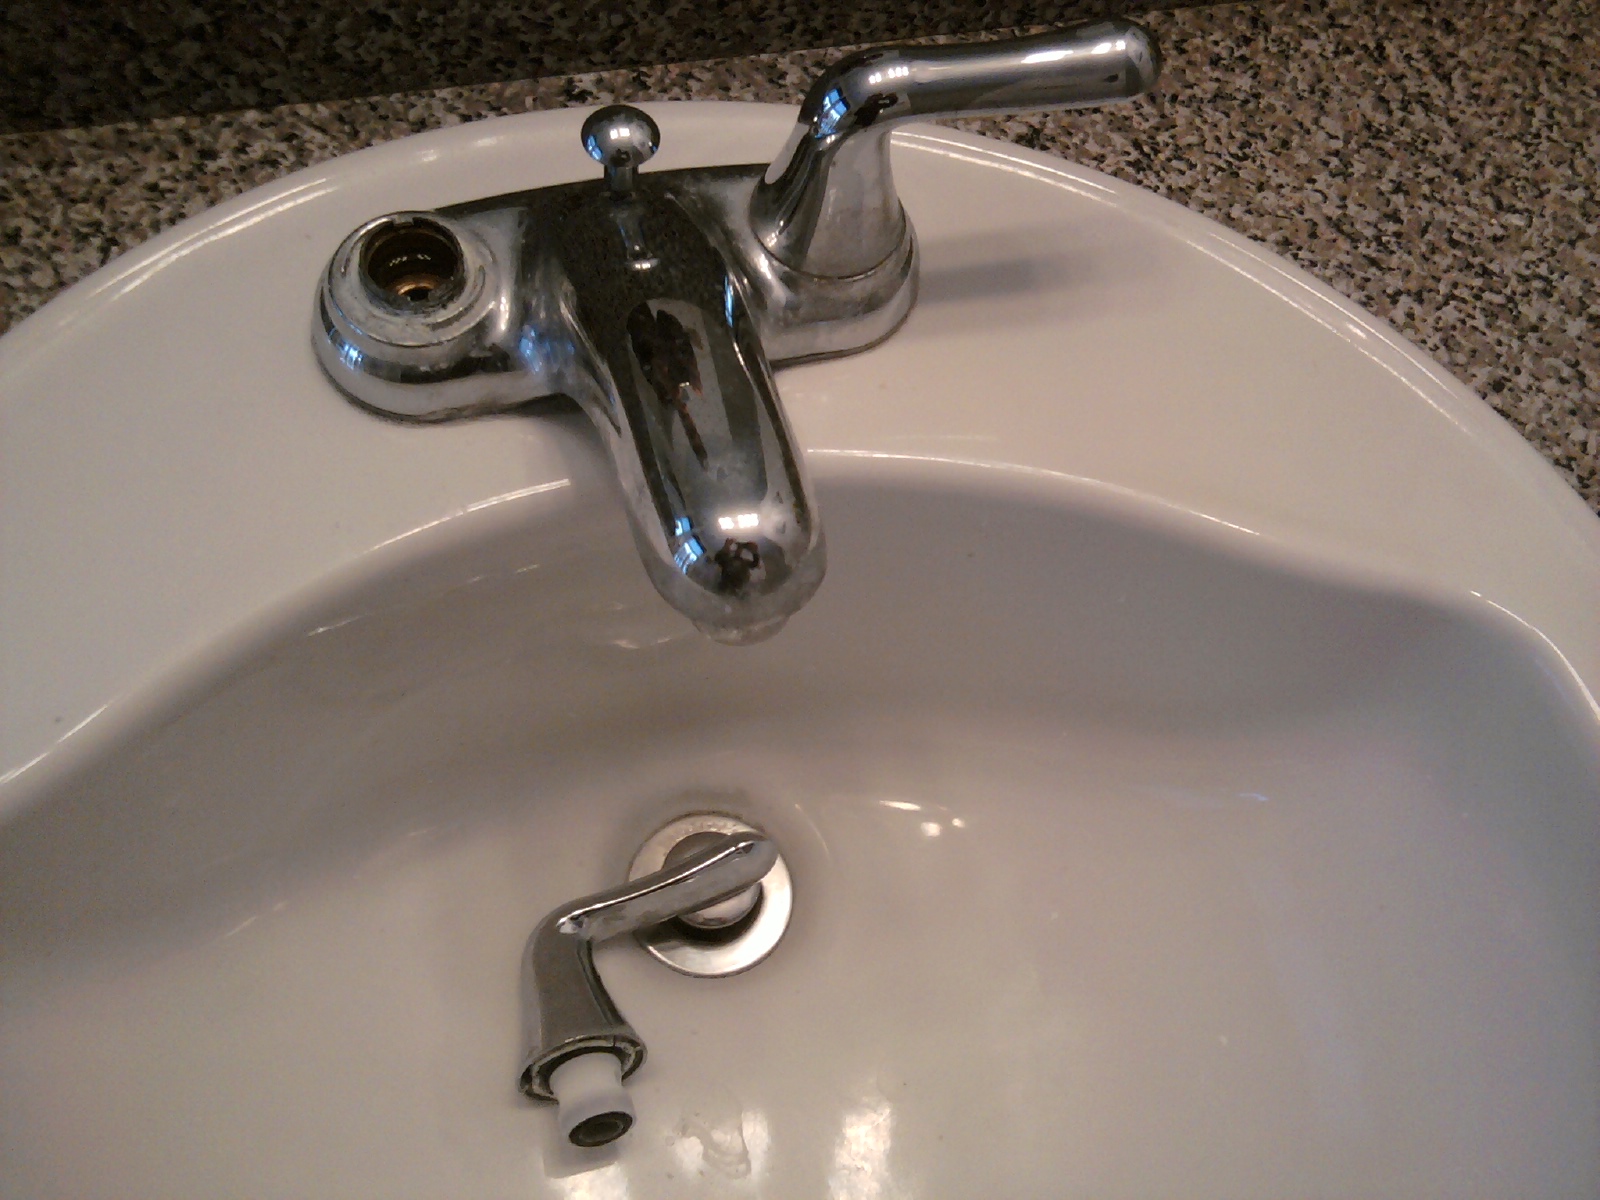 Hot Water Handle Dislodged from Bathroom Faucet